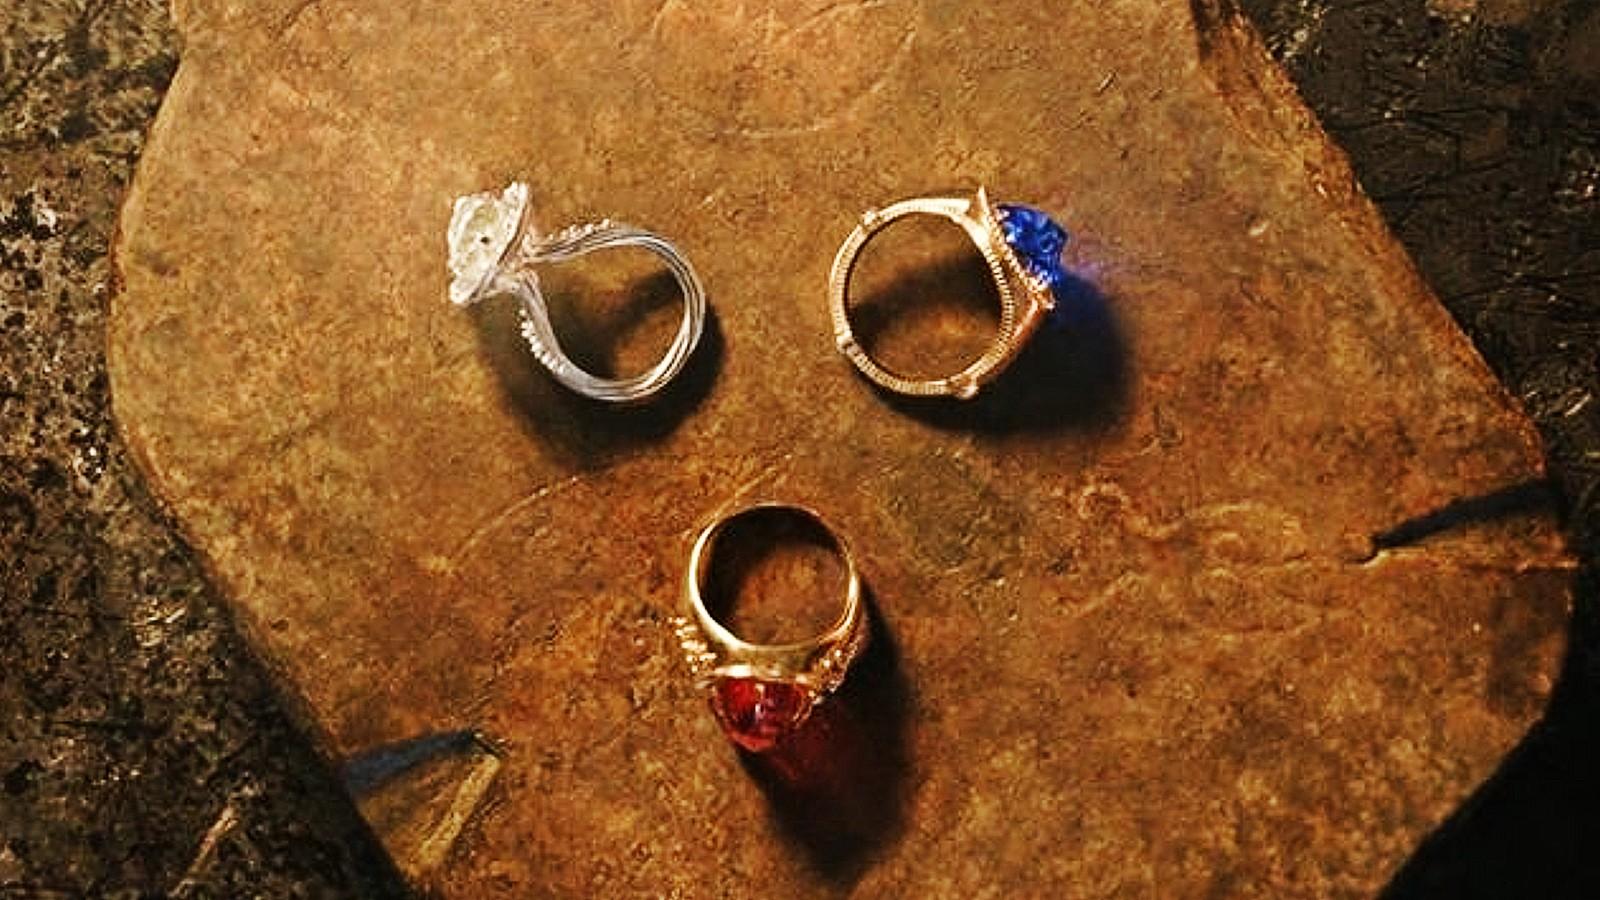 The three elven rings in Rings of Power Episode 8